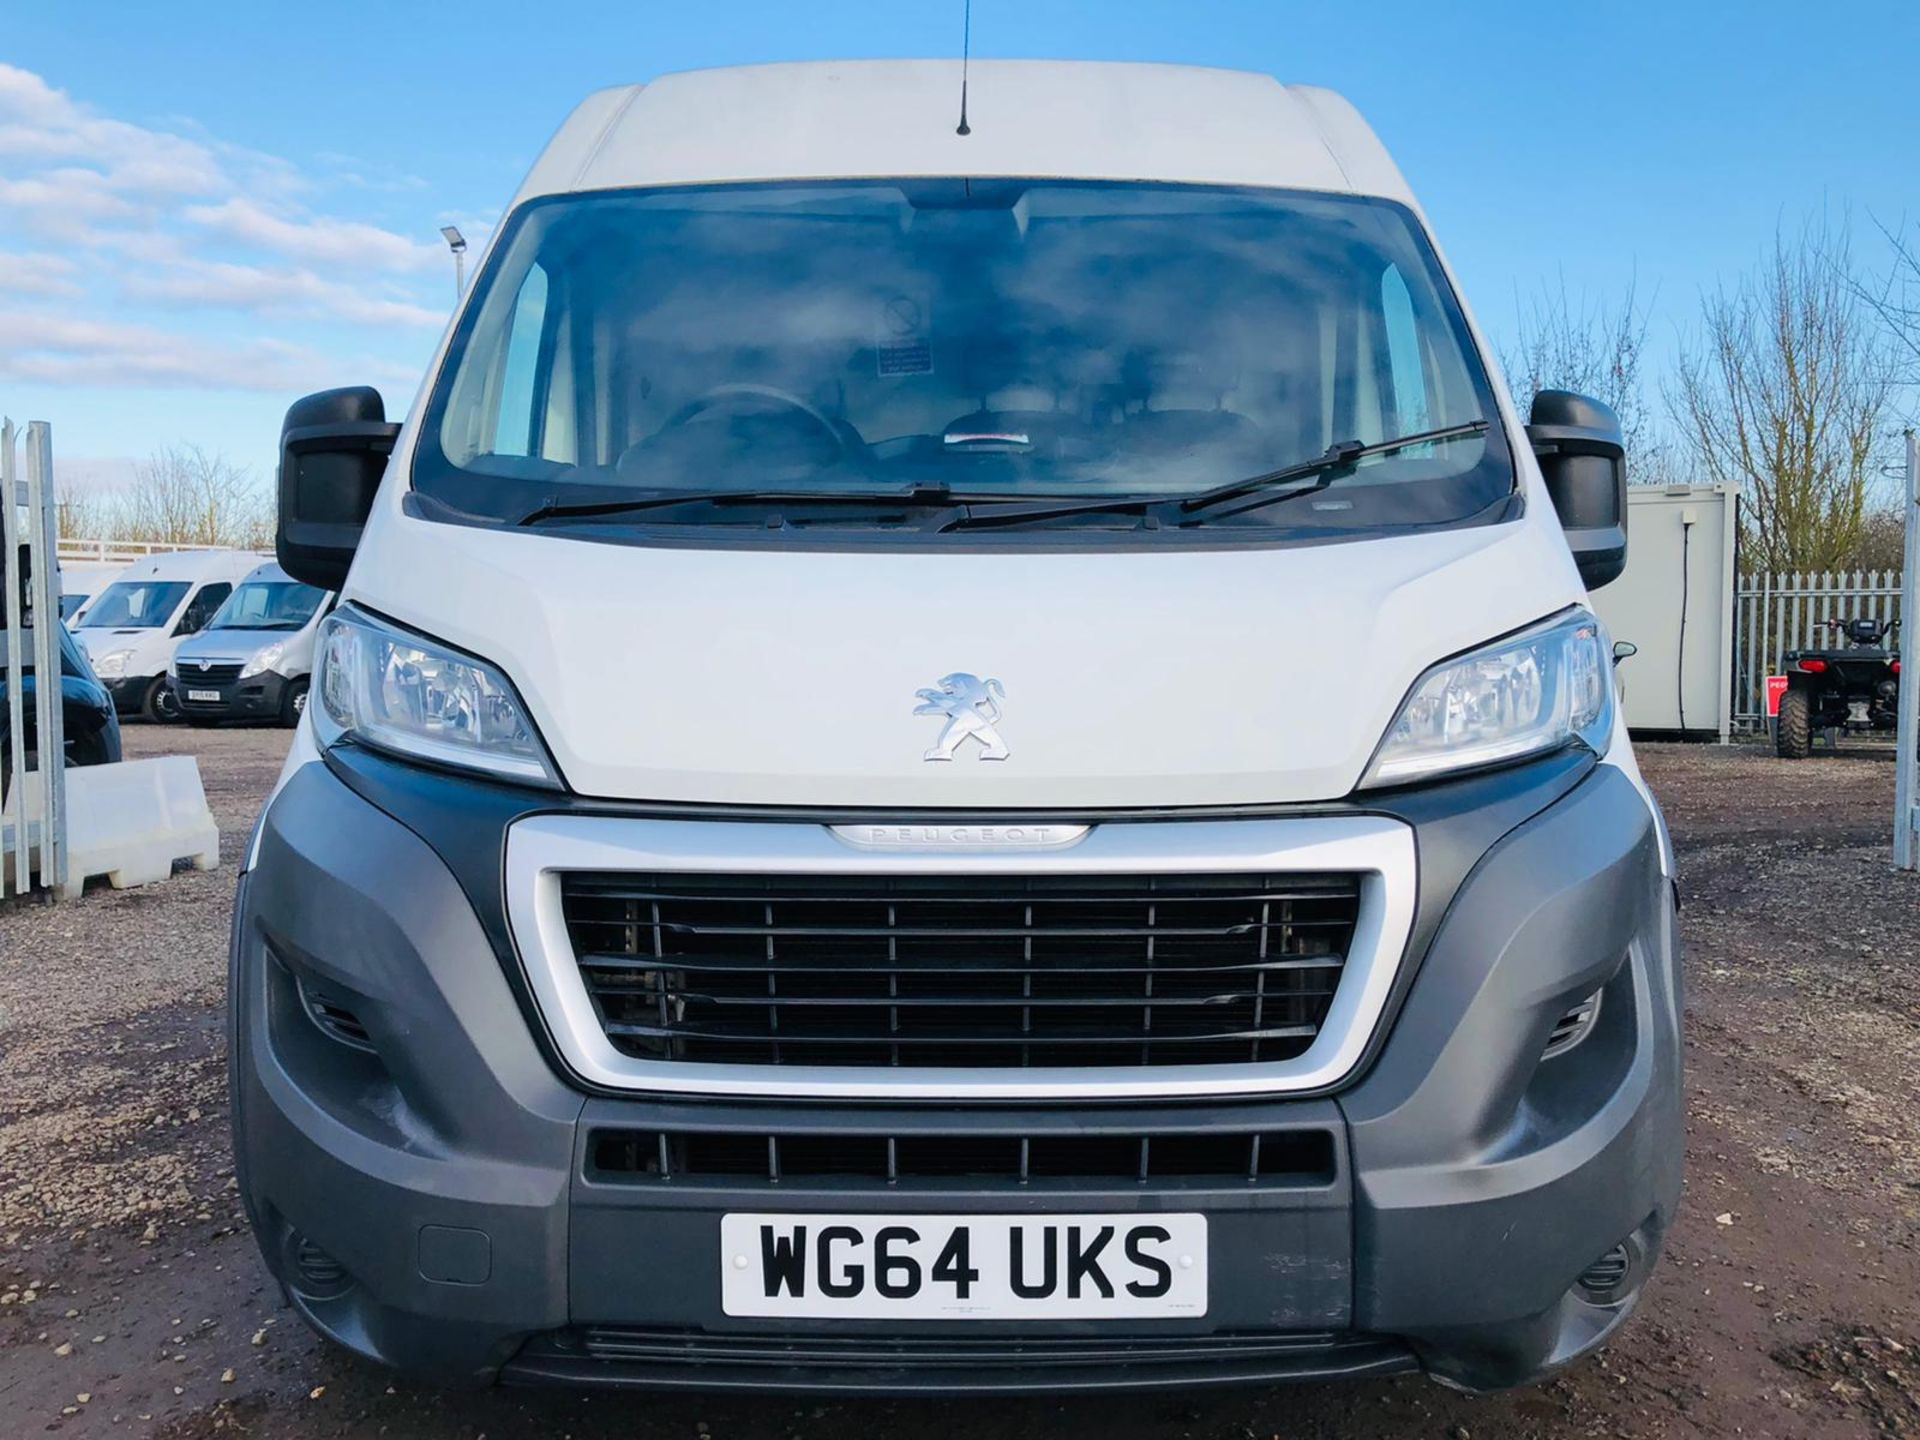 Peugeot Boxer 2.2 HDI 435 Professional L4 H2 2014 '64 Reg' Sat Nav - Air Con - Only Done 76K - Image 6 of 24